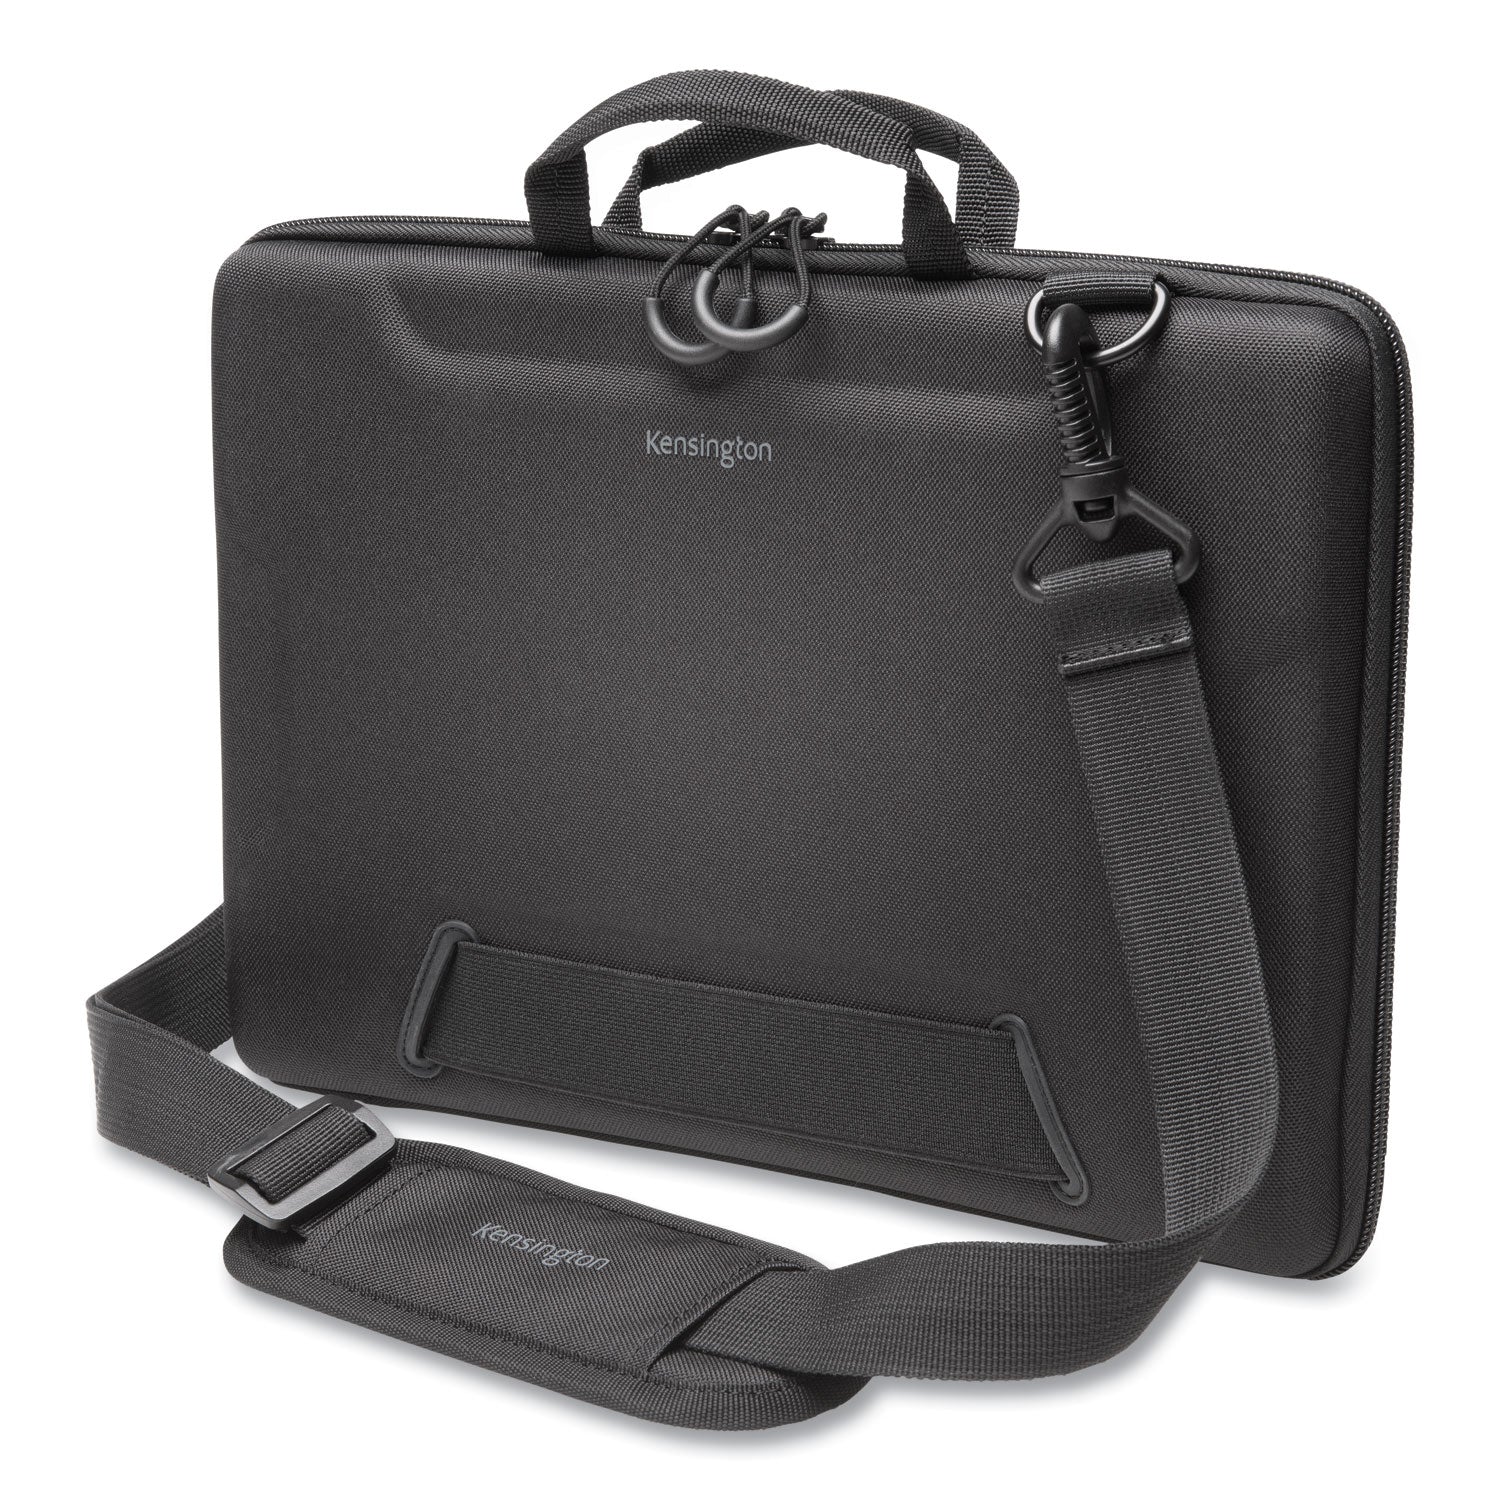 ls520-stay-on-case-for-chromebooks-and-laptops-fits-devices-up-to-116-eva-water-resistant-132-x-16-x-93-black_kmw60854 - 1